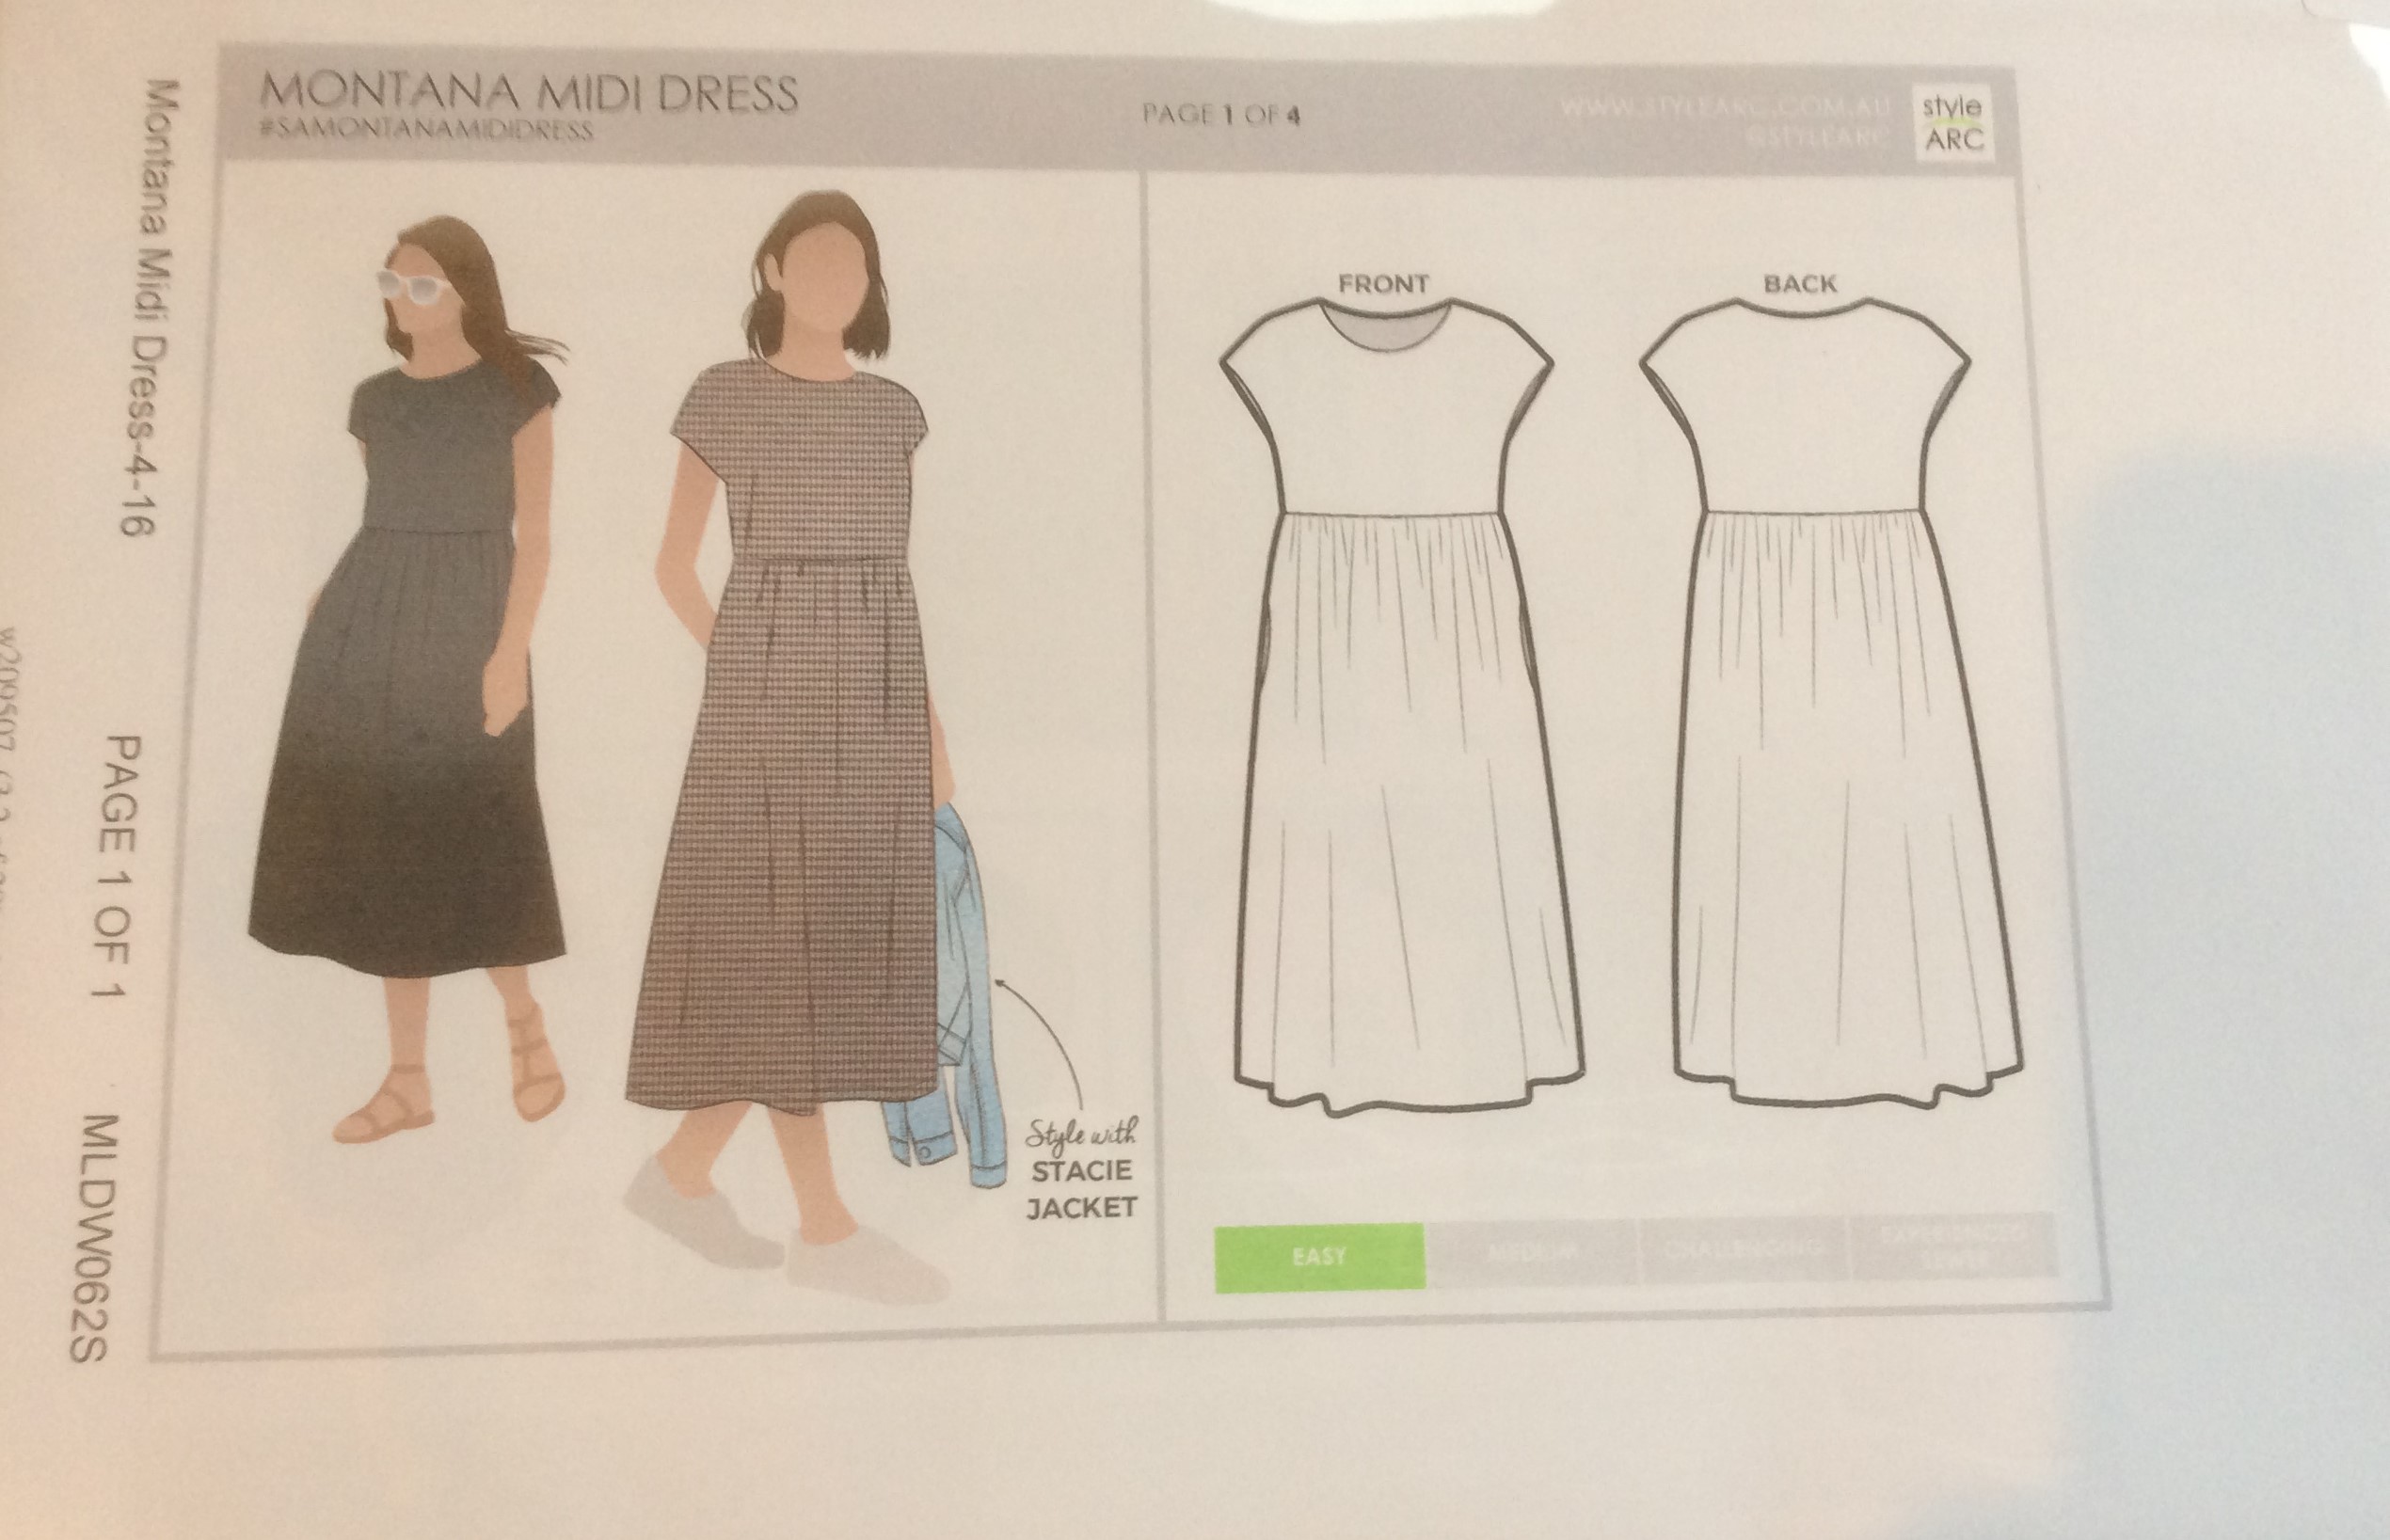 StyleArc Montana Midi Dress Montana Midi Dress pattern review by BevJP